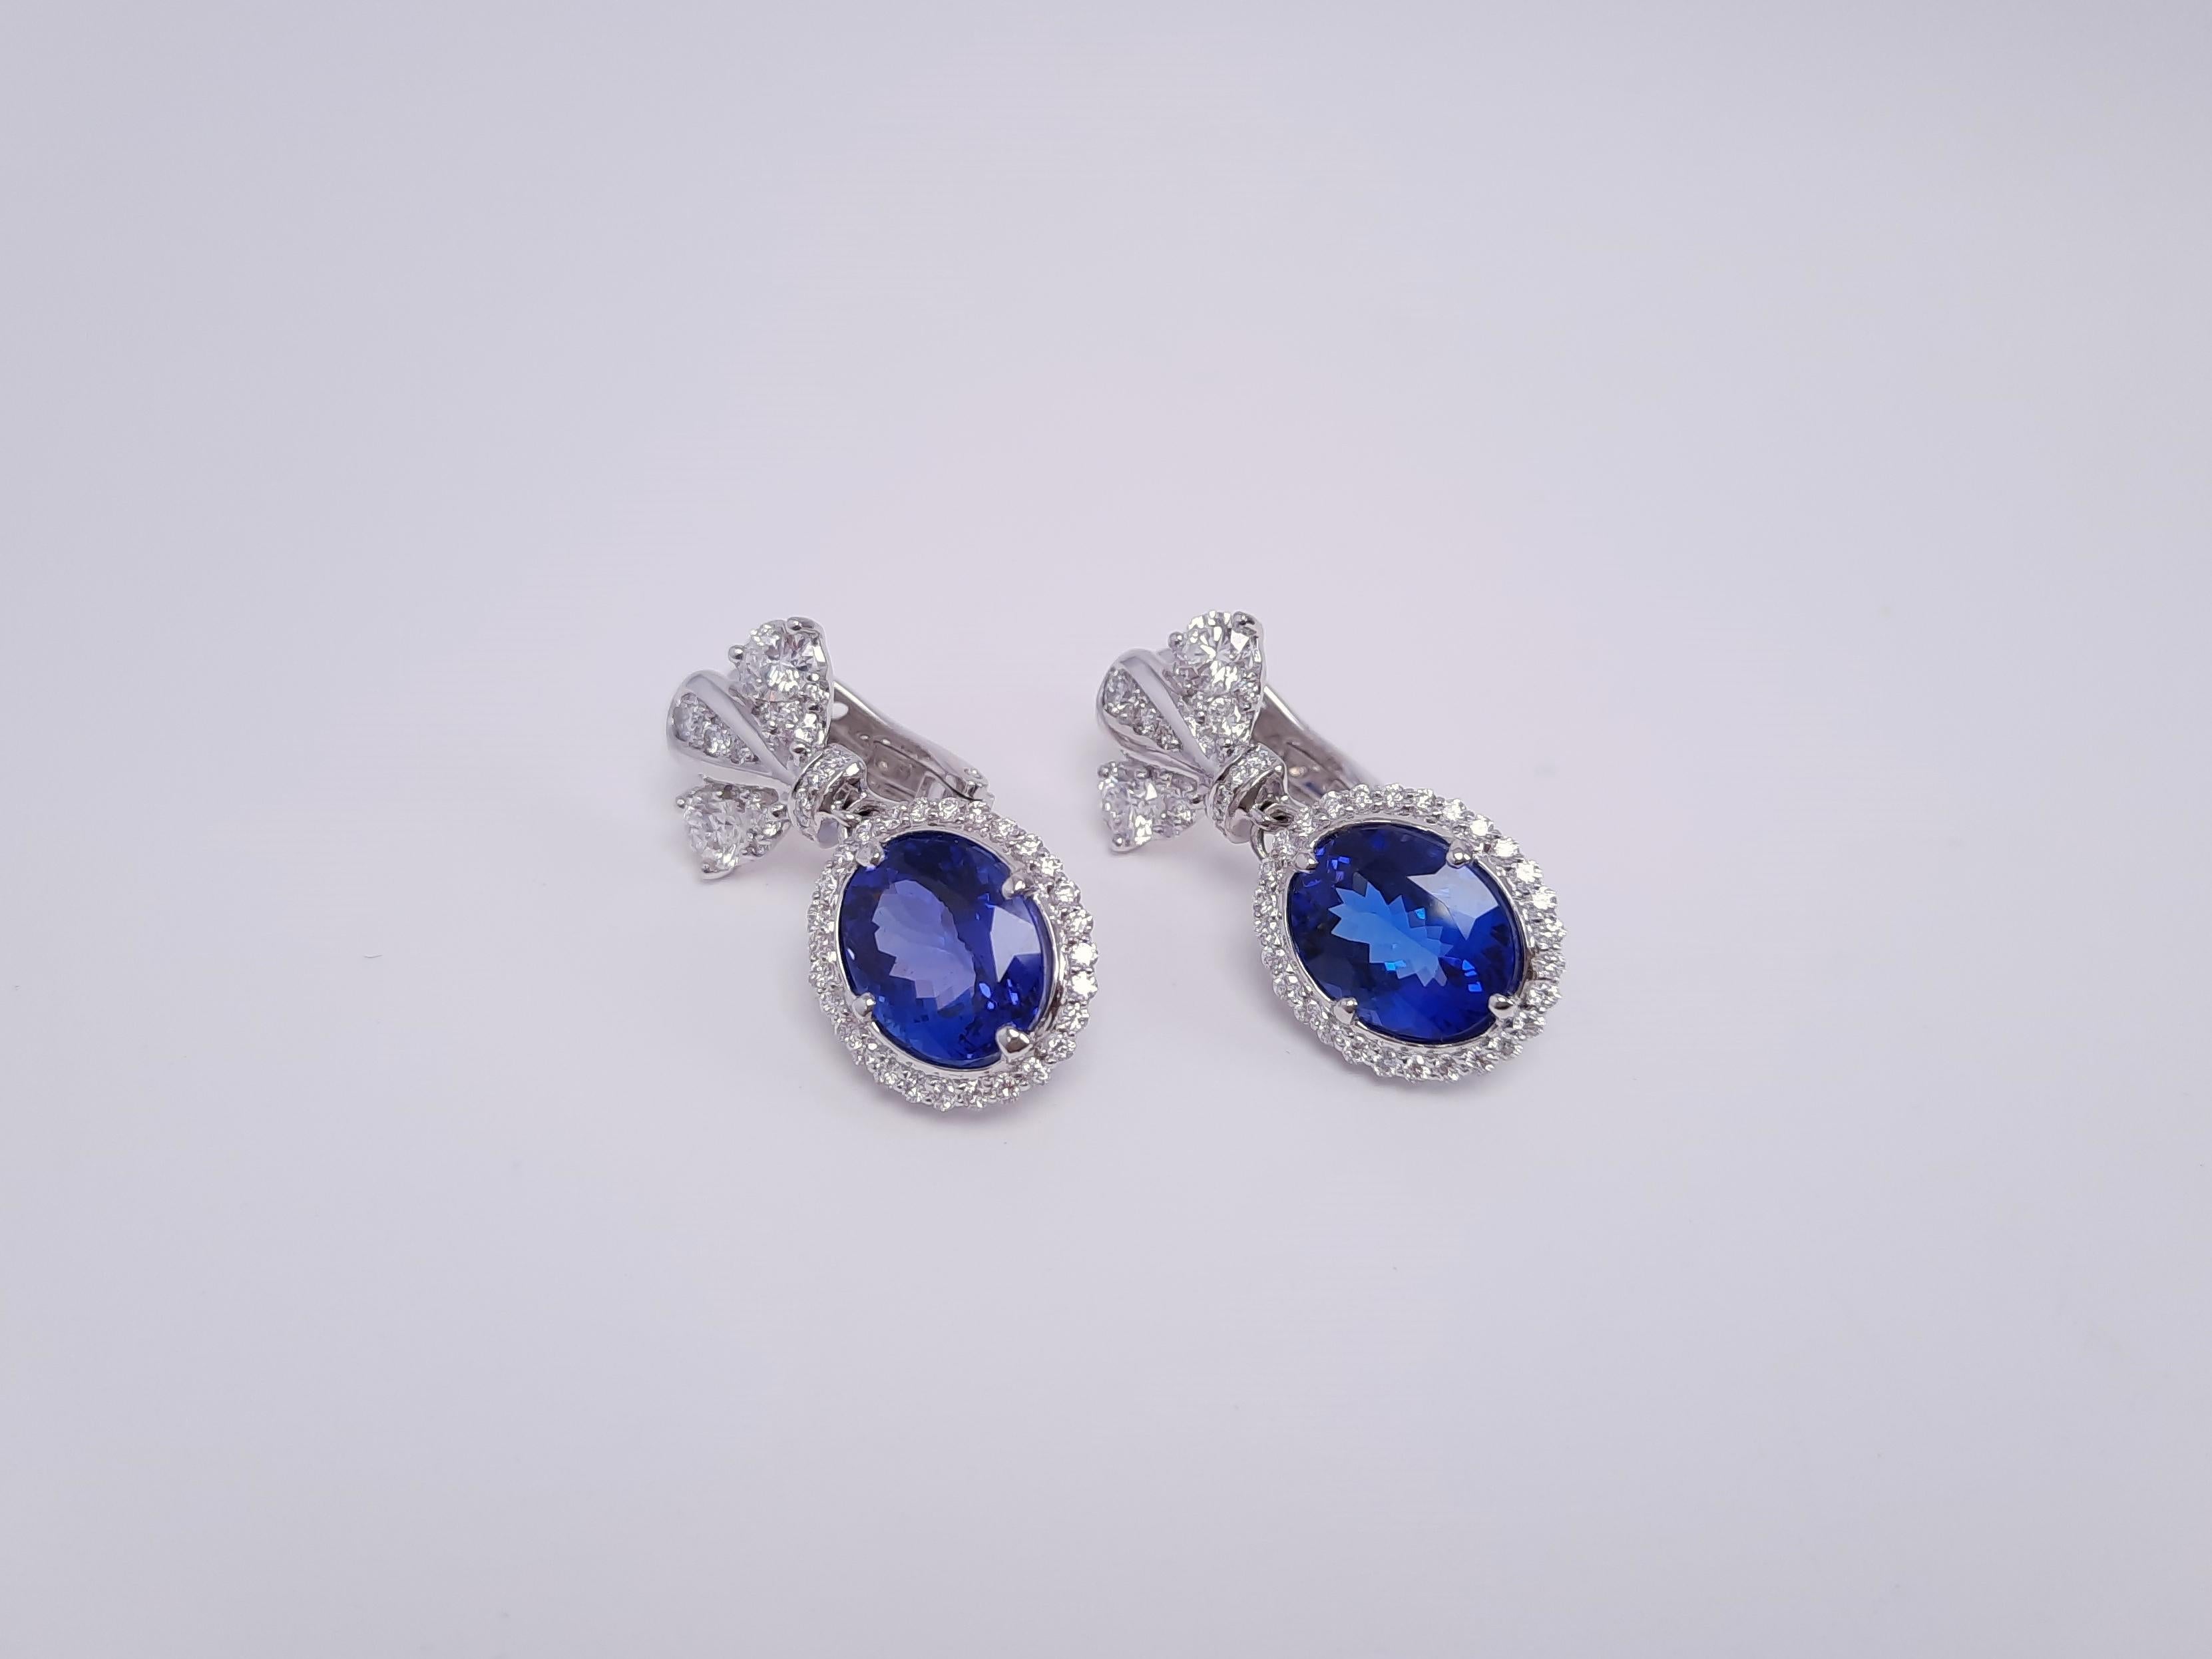 Elegant and classic, the earrings made of diamonds and deep Tanzanites, are inspired by the splendid period of Russian and Europe. Dedicated for the Imperial greatness, luxury, beauty, and noble aspiration, the crown shaped earrings from this “